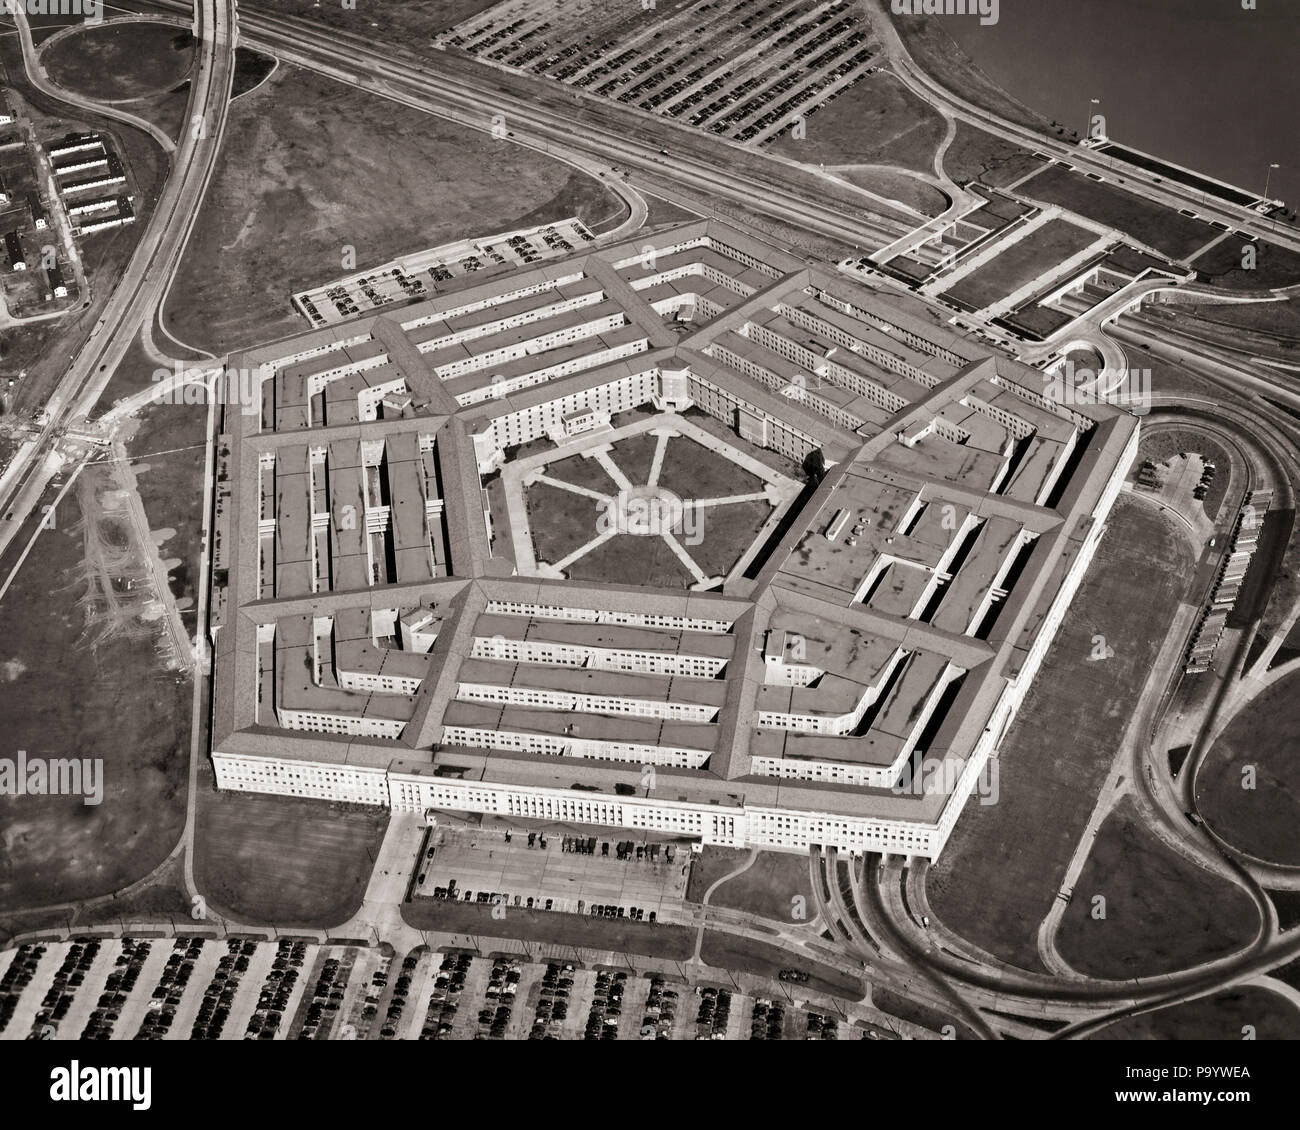 1940s 1950s ABSOLUTE AERIAL PENTAGON BUILDING POLYGON 5 SIDES AND ANGLES DEFENSE MILITARY HUB CENTER ARLINGTON VA USA - q74732 CPC001 HARS VA AERIAL VIEW ARLINGTON BLACK AND WHITE DEPARTMENT OF DEFENSE OLD FASHIONED PENTAGON Stock Photo